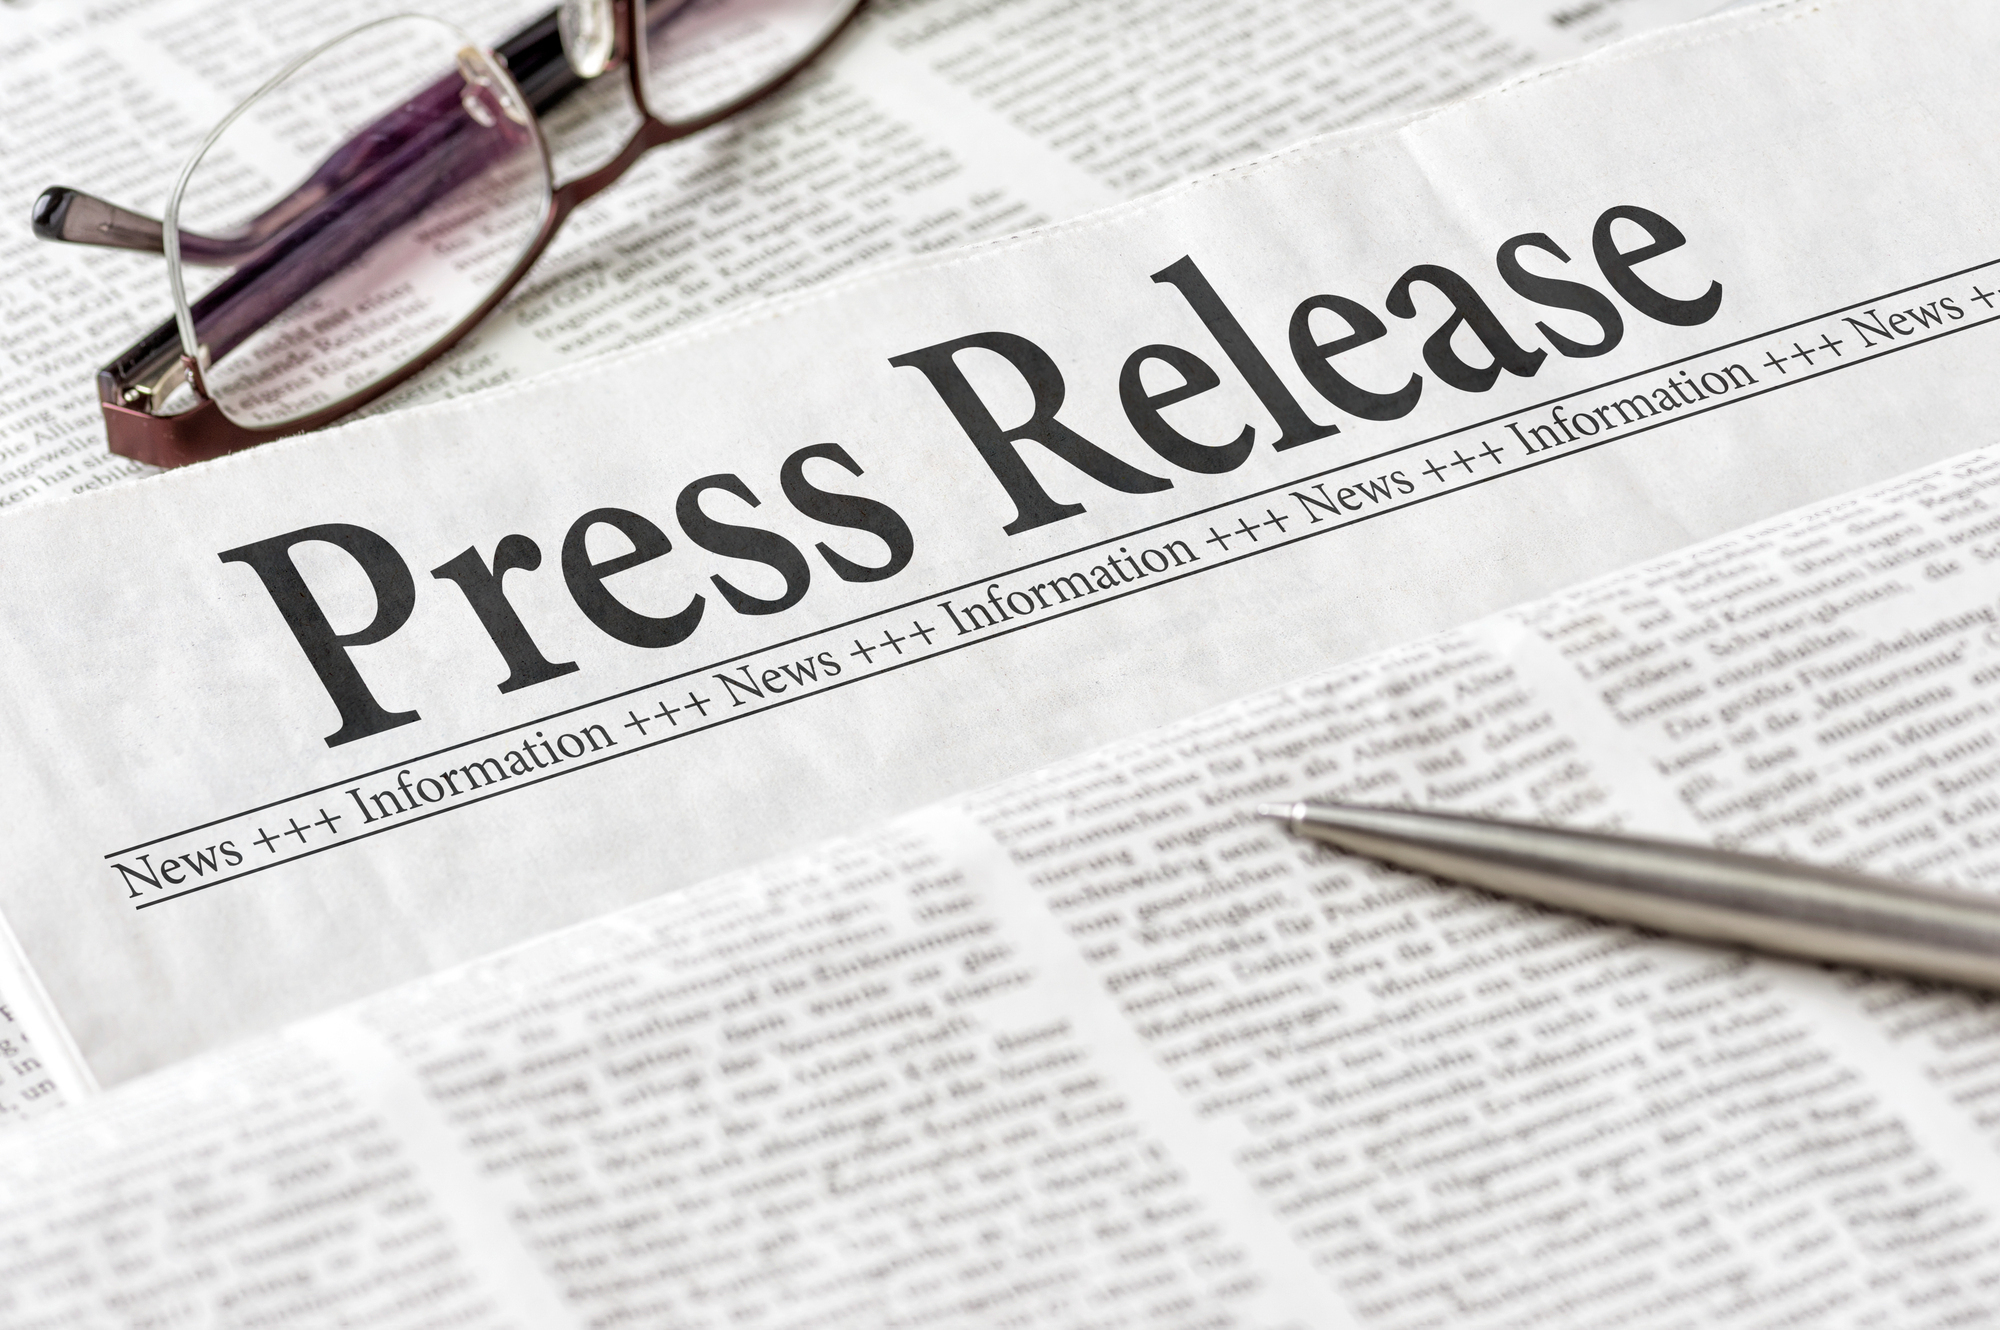 Perfecting Press Releases